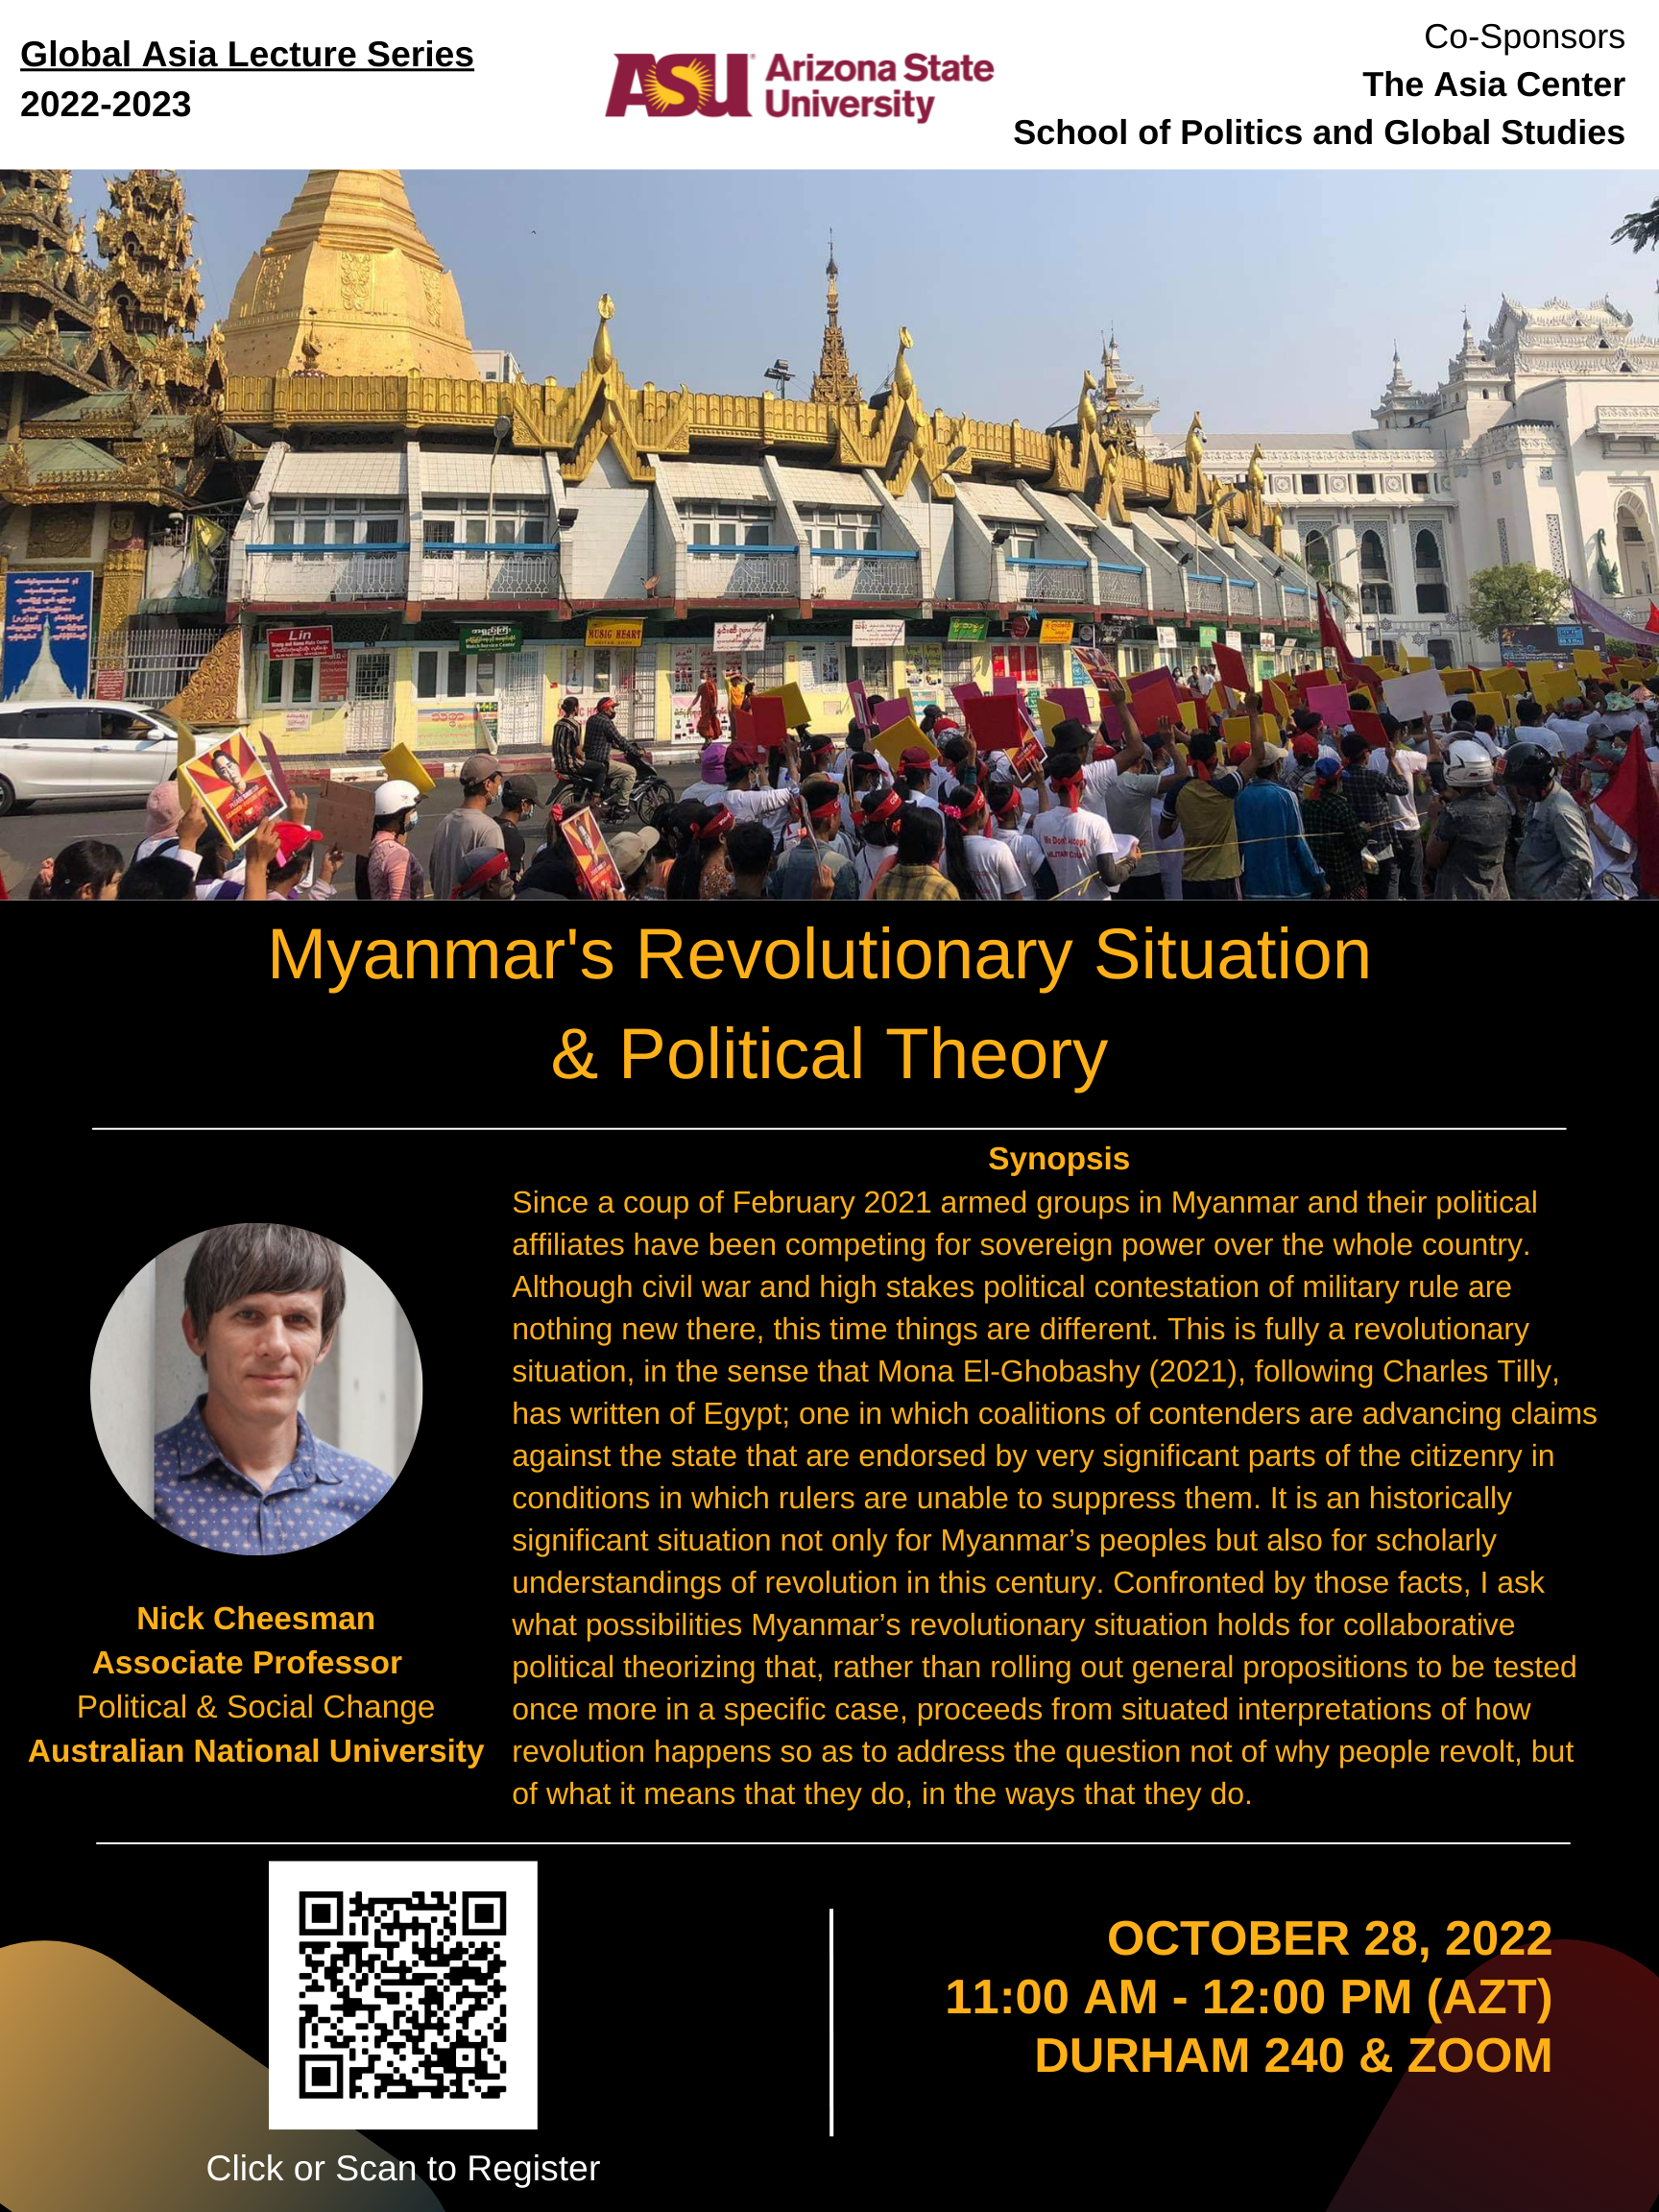 Global Asia Lecture Series: Myanmar's Revolutionary Situation & Political Theory